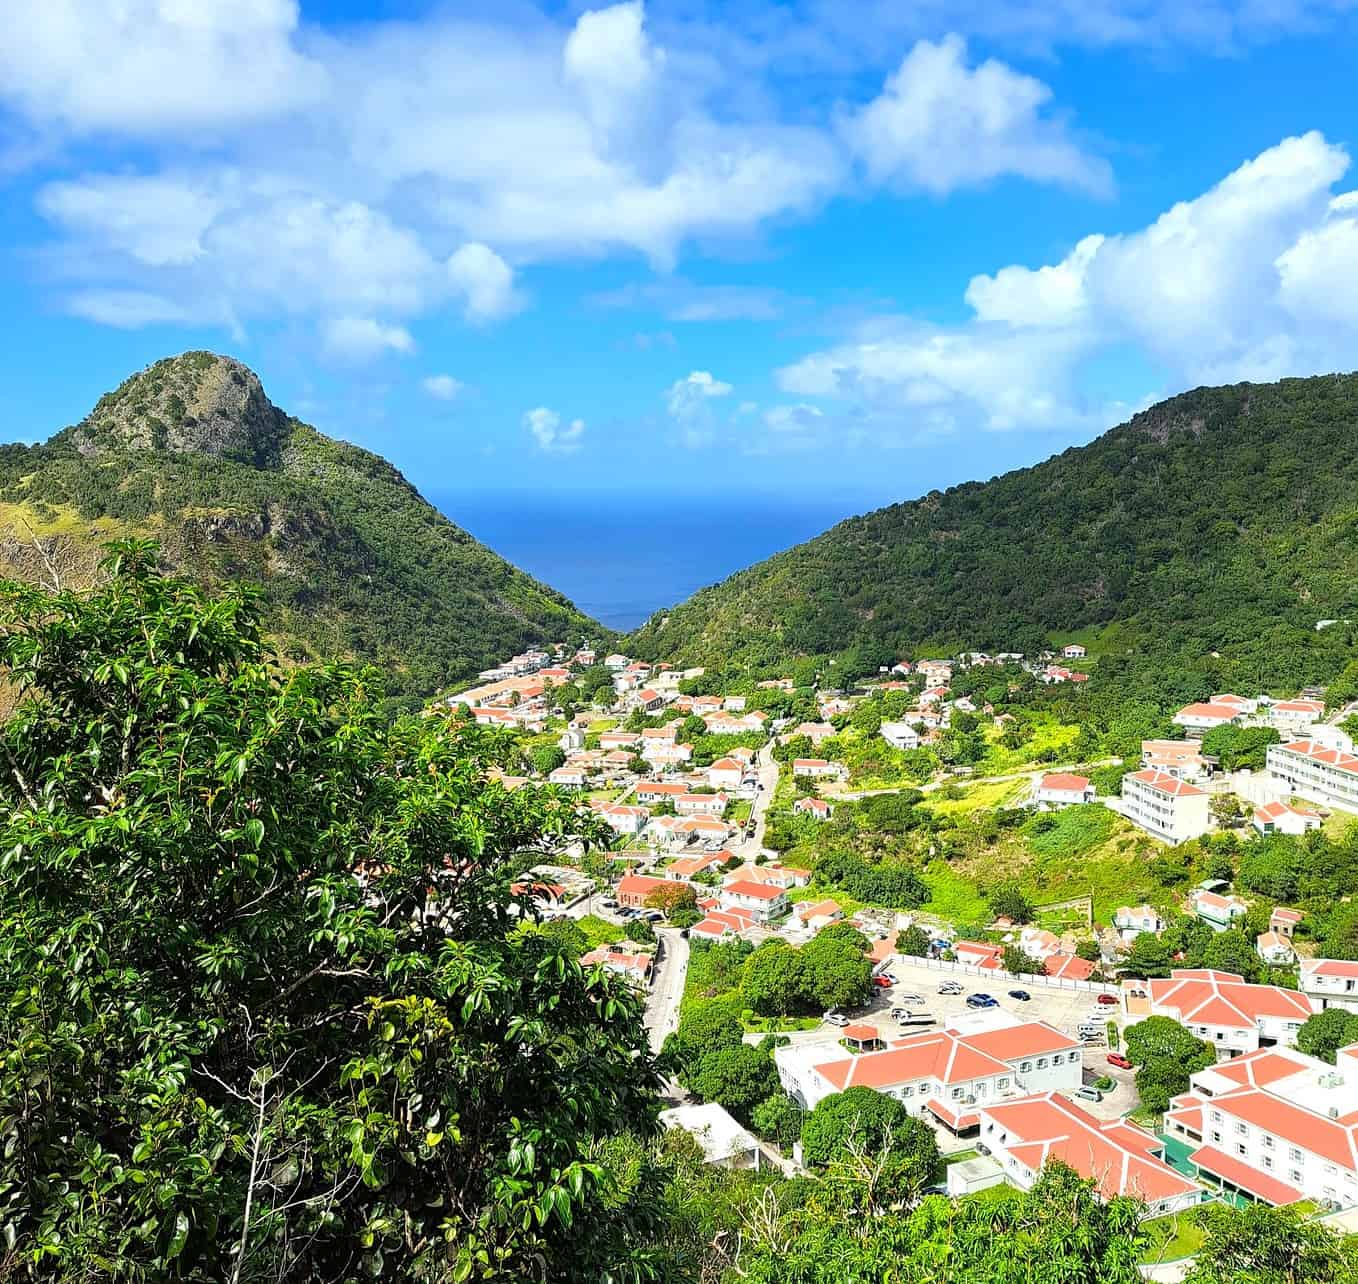 island hopping around st. martin - A Guide to Island Hopping Around St. Martin